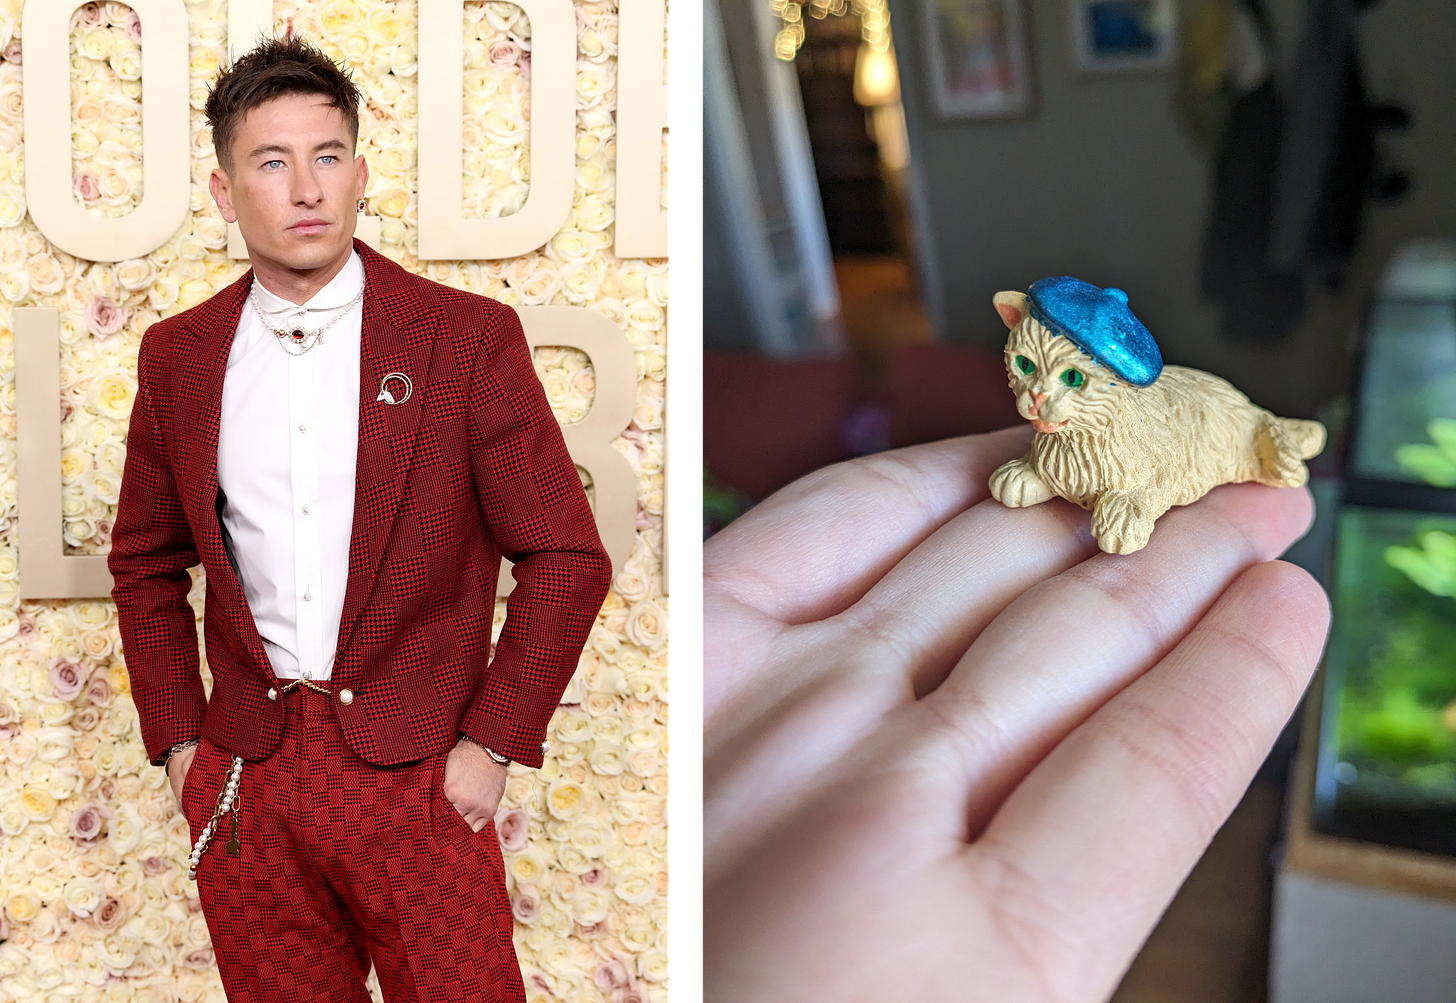 Left: Barry Keoghan in a red checked suit situation. Right: Parisian cat lounging in a metallic blue beret.